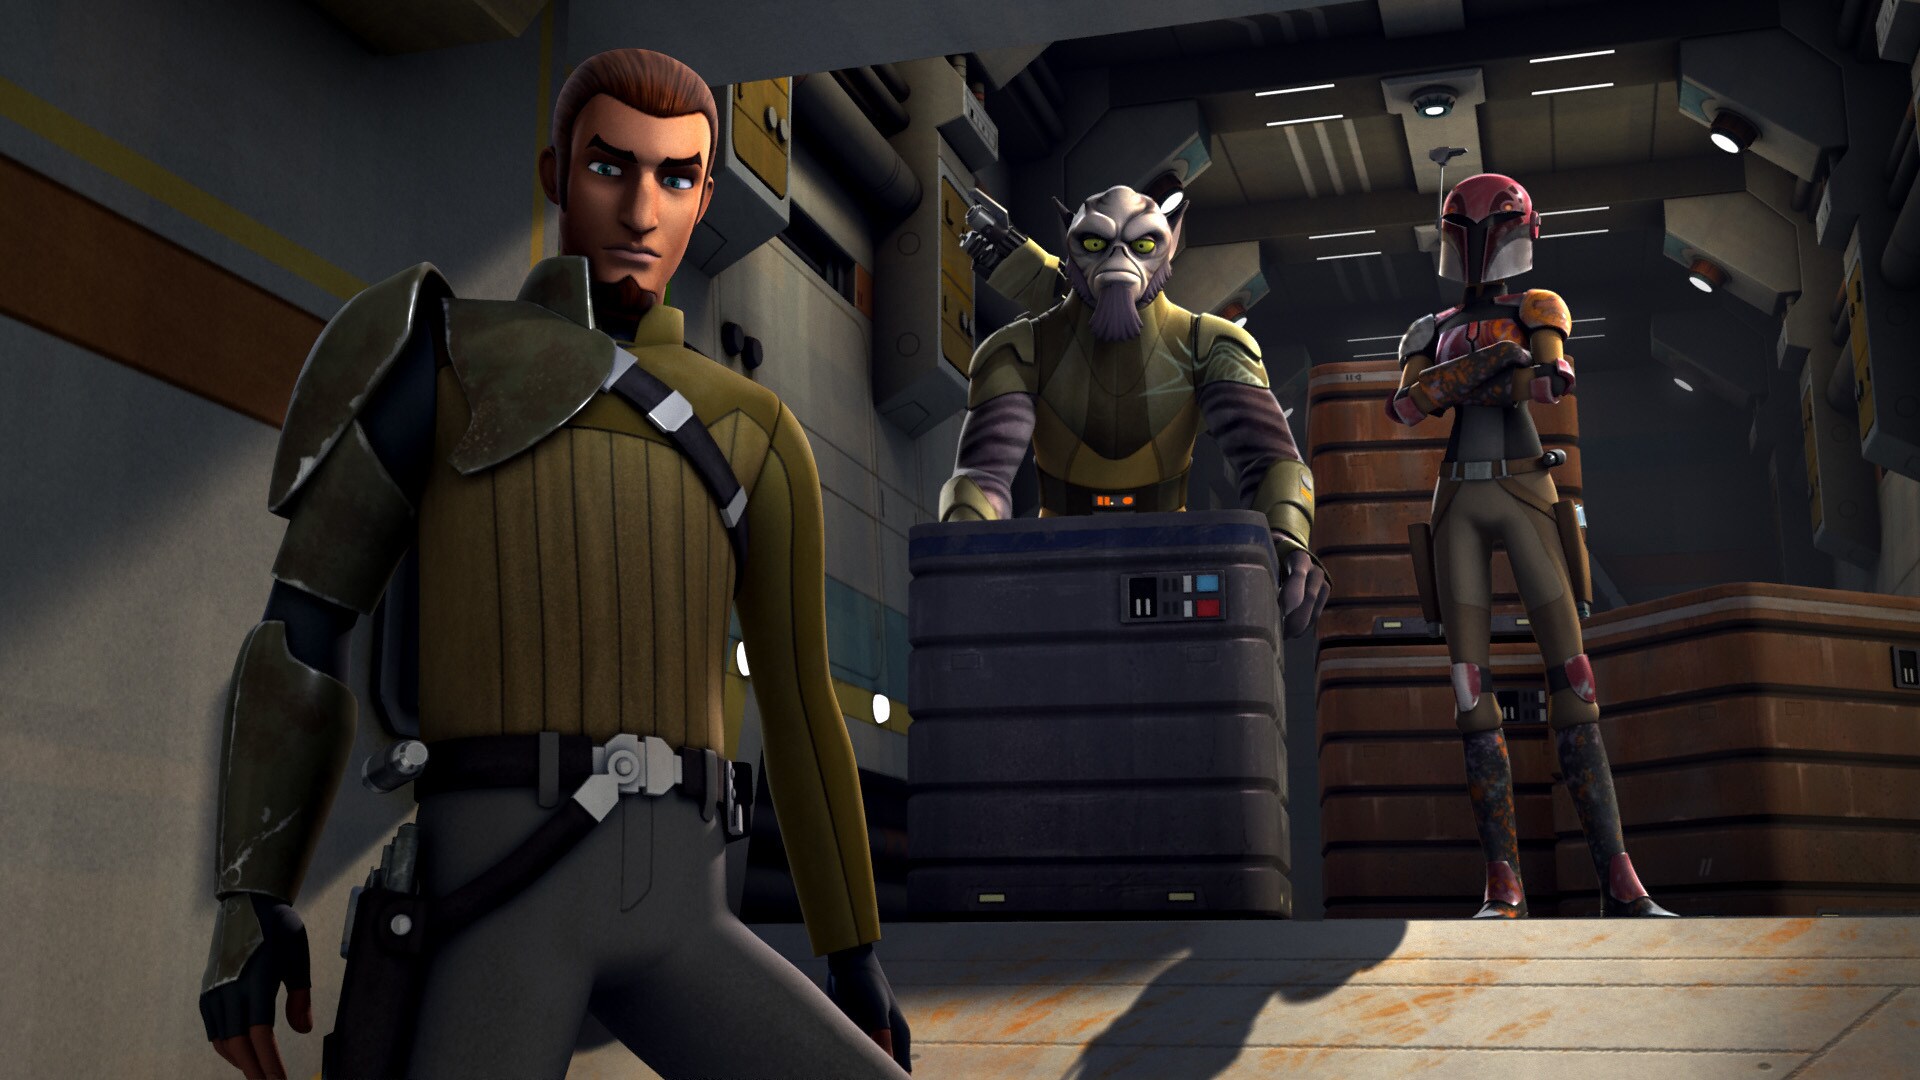 Sabine took odd jobs as a bounty hunter to survive before joining the Ghost crew.